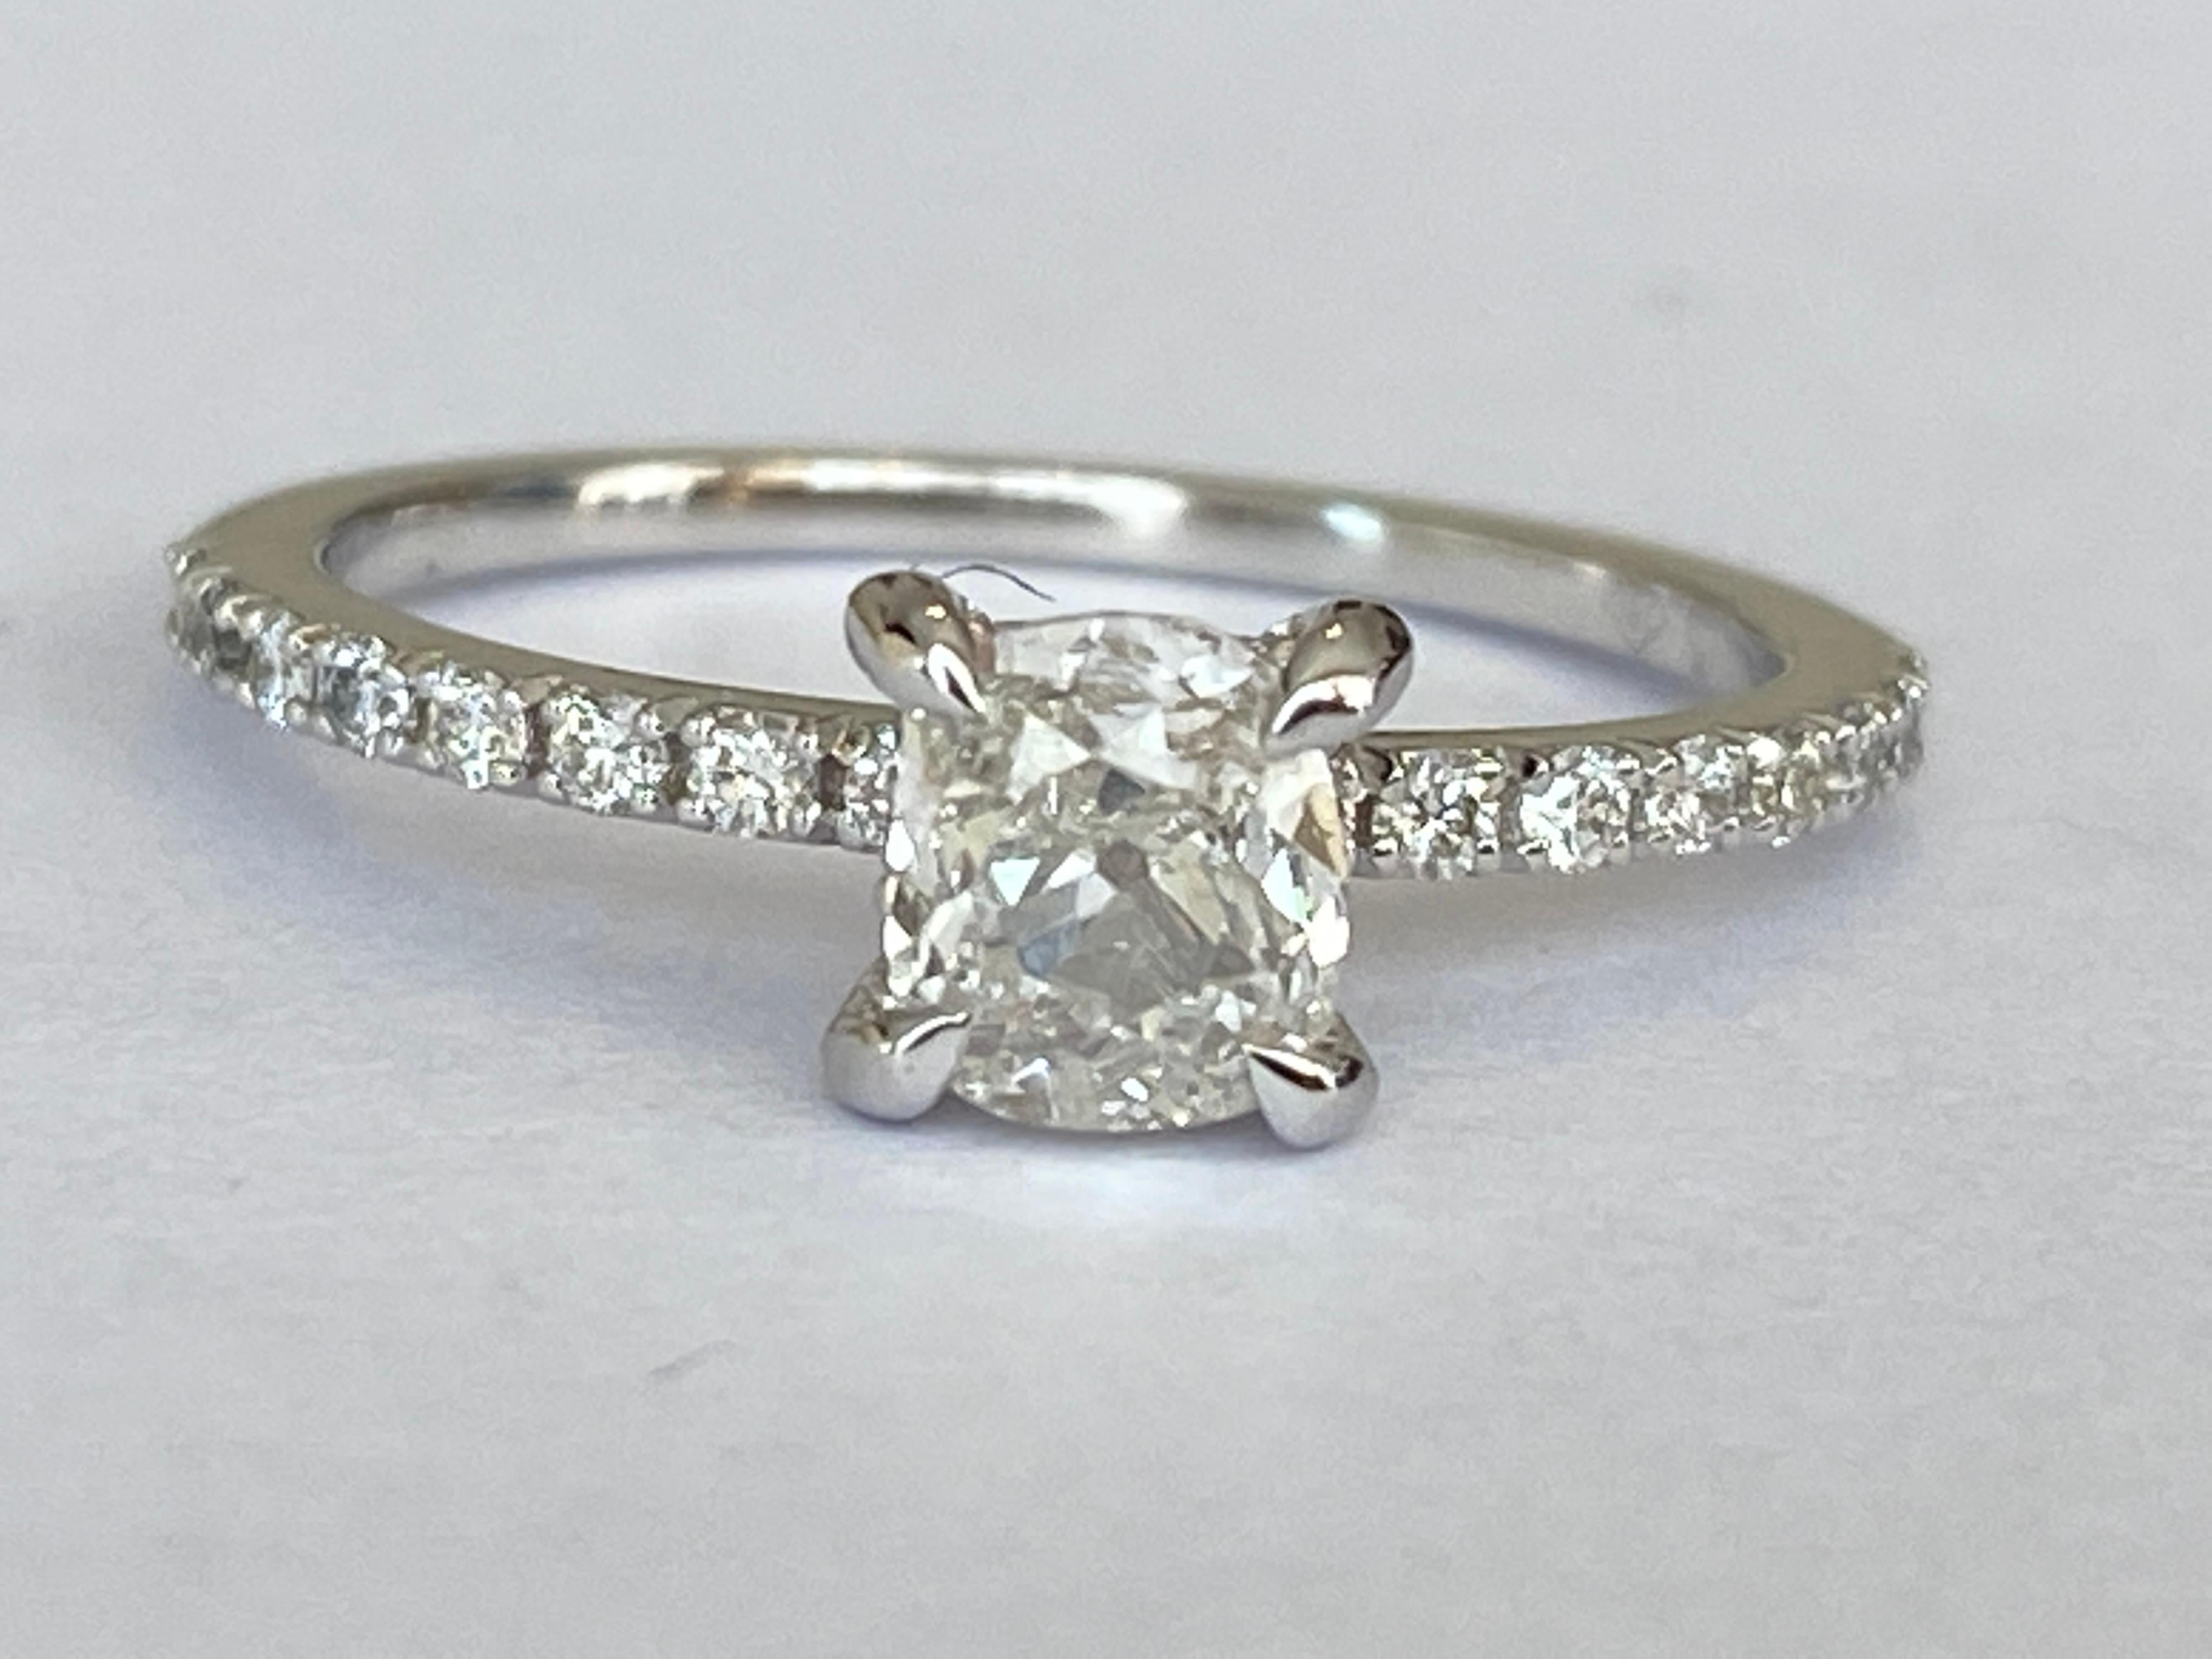 Offered: 18 kt white gold solitaire ring with  0.58 ct antique cushion cut diamond of quality G/SI1 and 28 stuks brilliant cut diamonds, approx. 0.25 ct in total, F/VVS/VS
Natural diamond - approx. 0.83 ct
1 stuk antique cushion diamond: 0.58crt